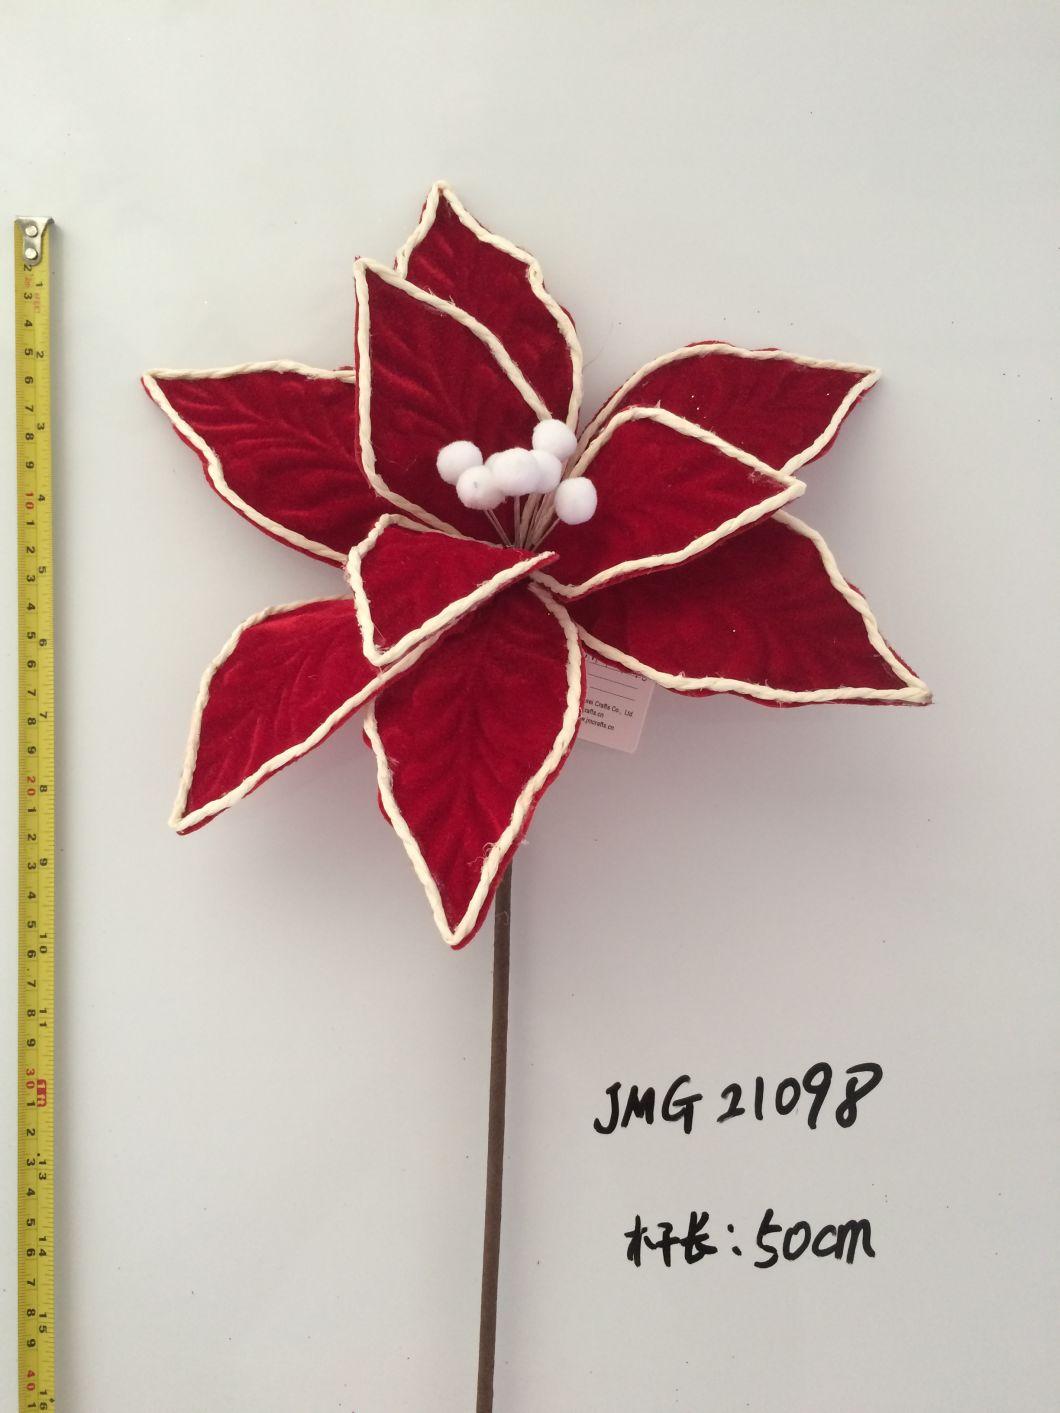 Ytcf109 Unique Leopard Print Christmas Flower with Poinsettia Type